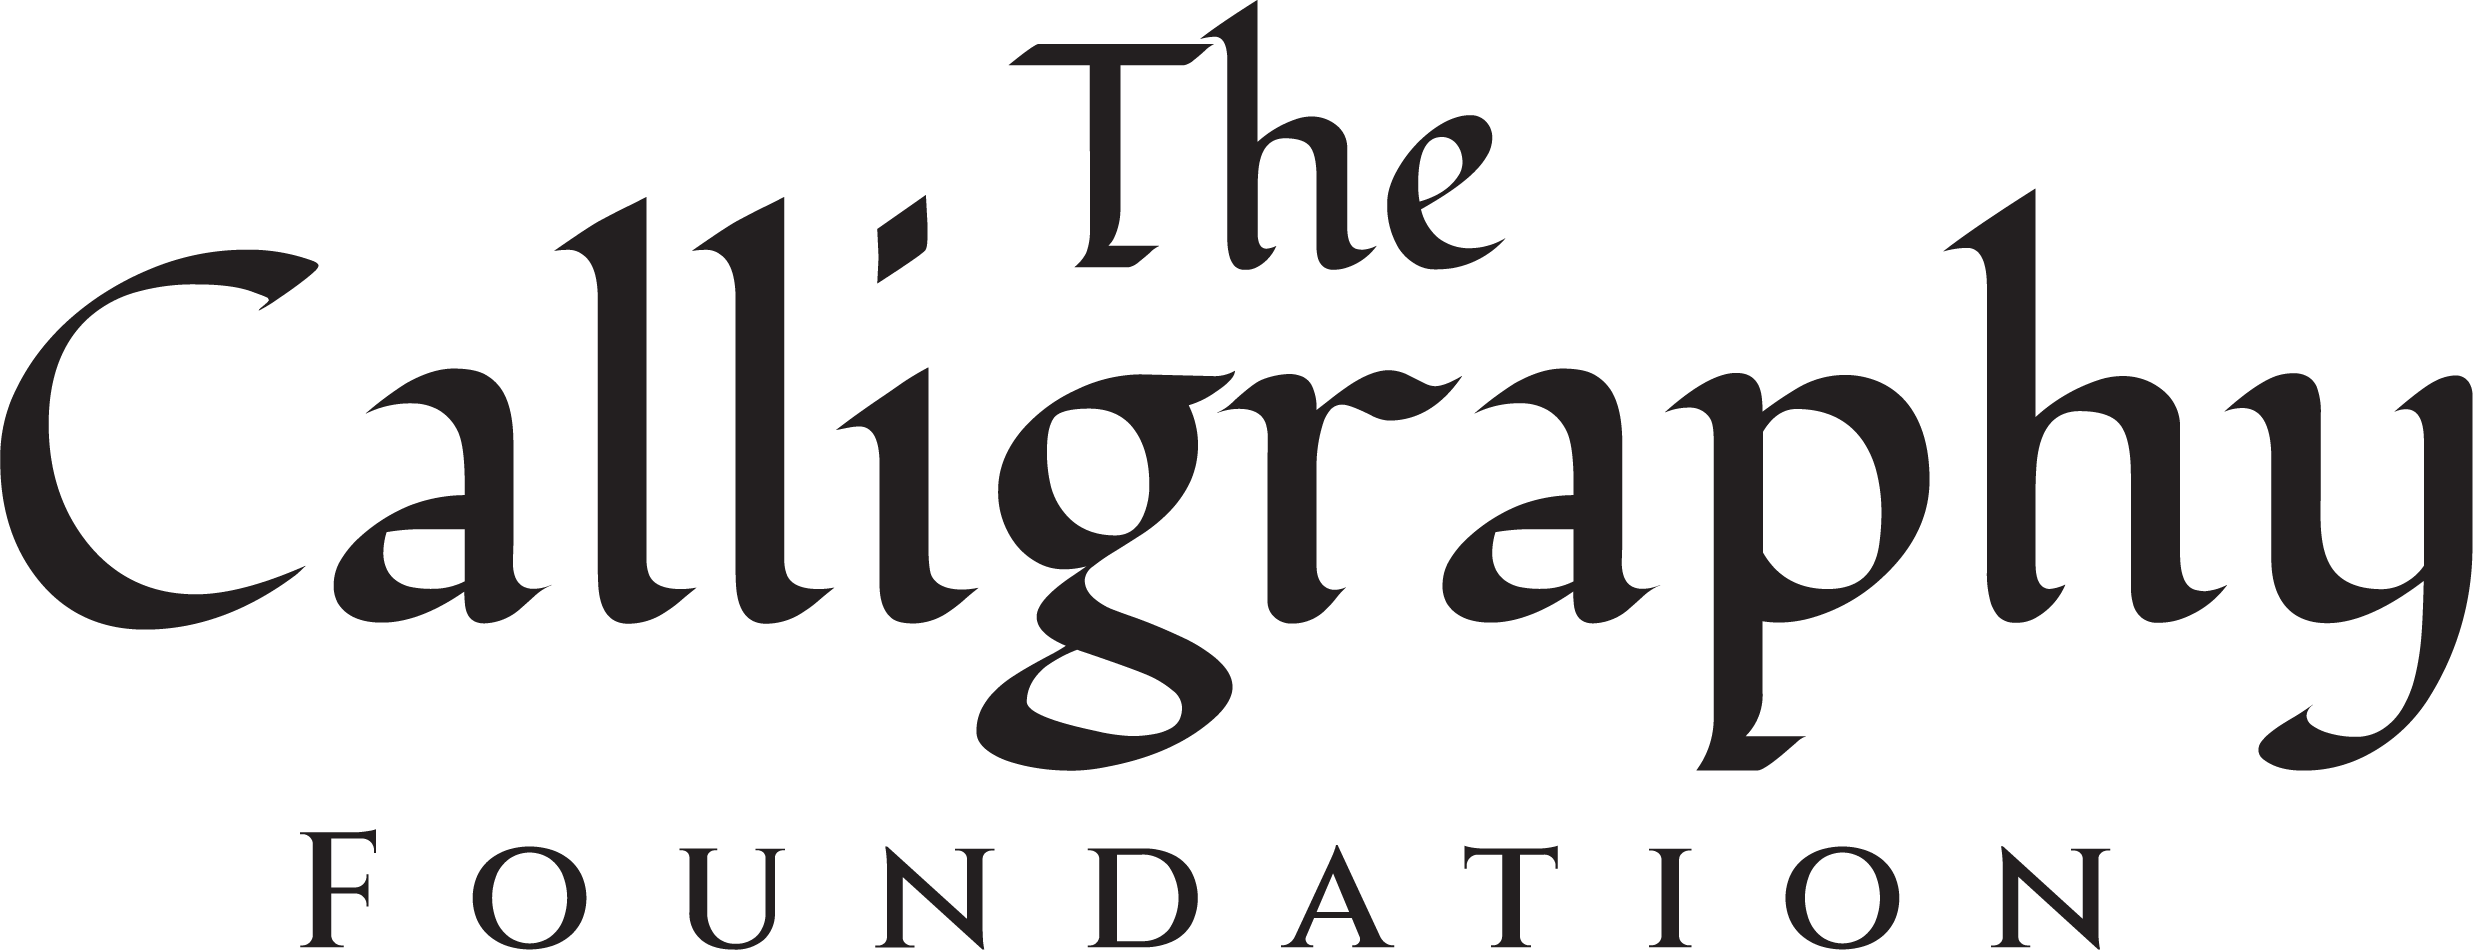 The Calligraphy Foundation